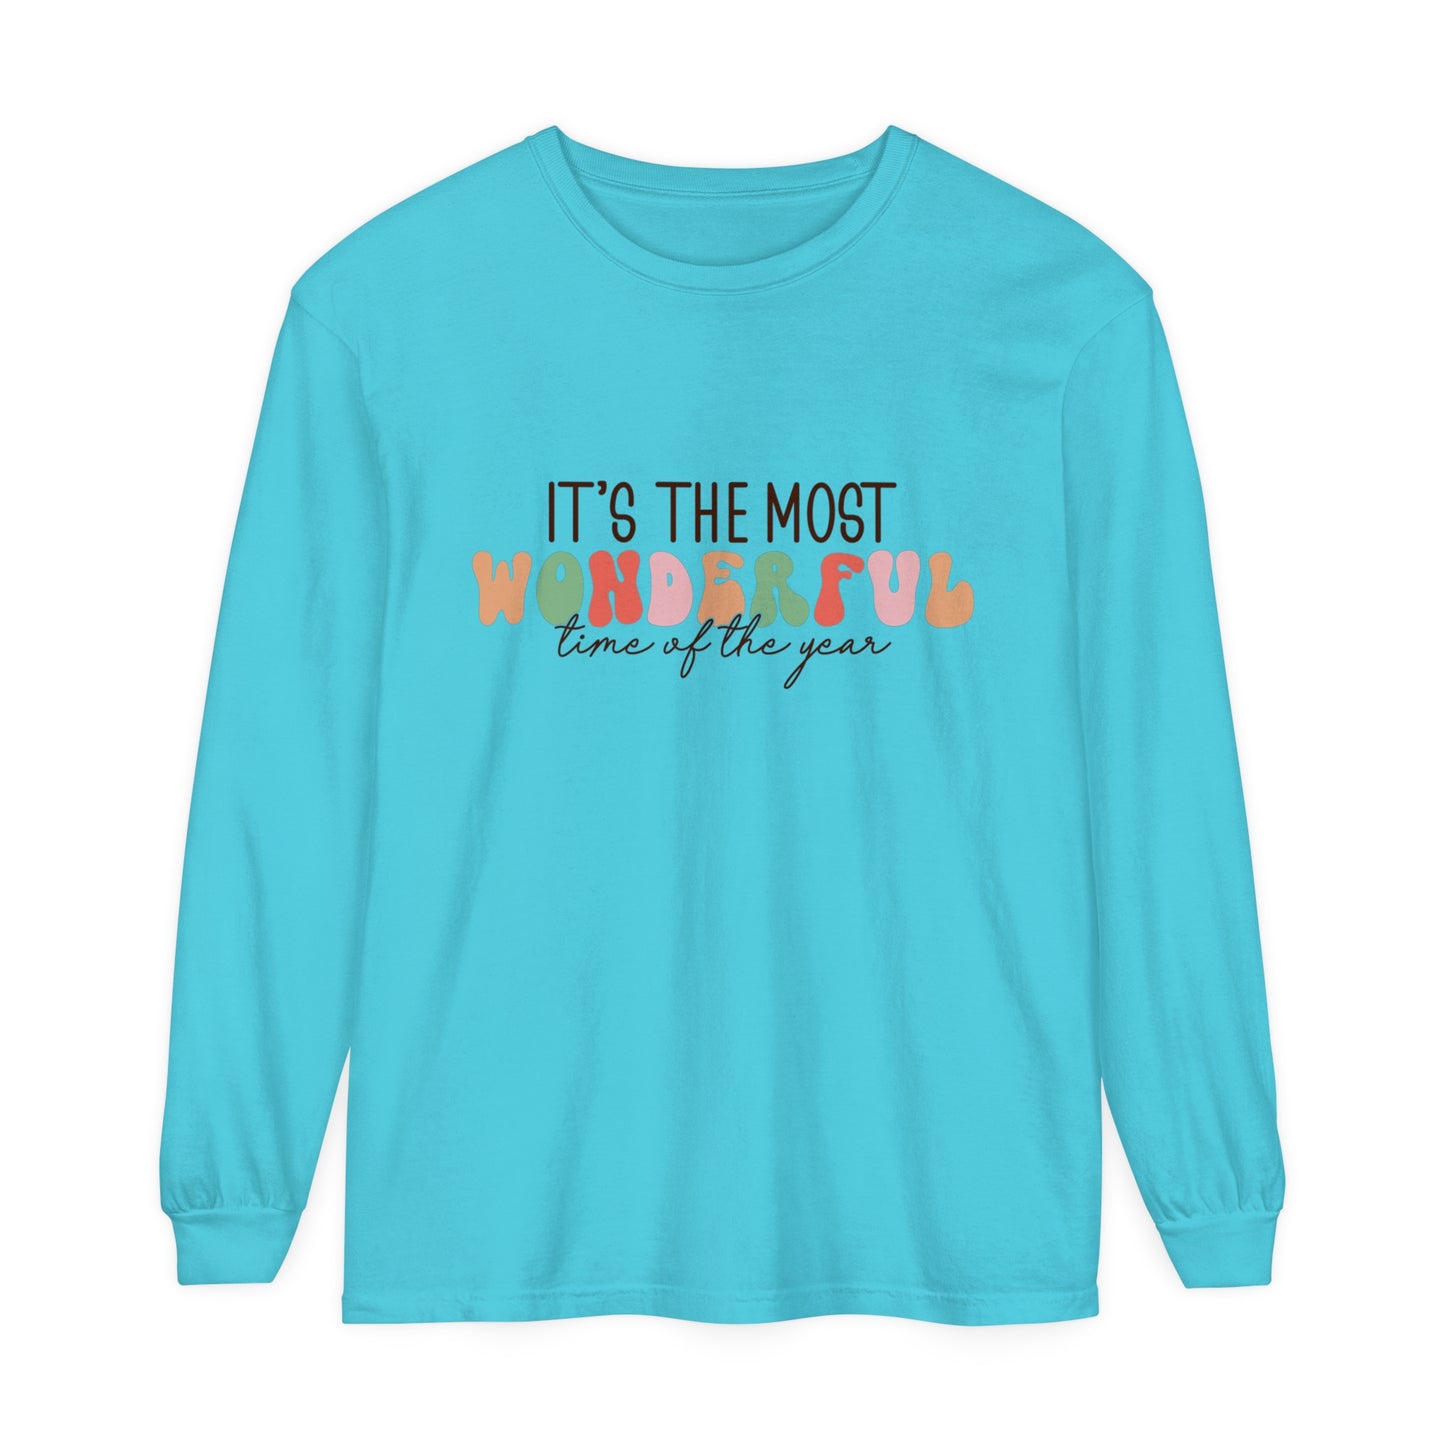 It's the most wonderful time of the year Women's Loose Long Sleeve T-Shirt